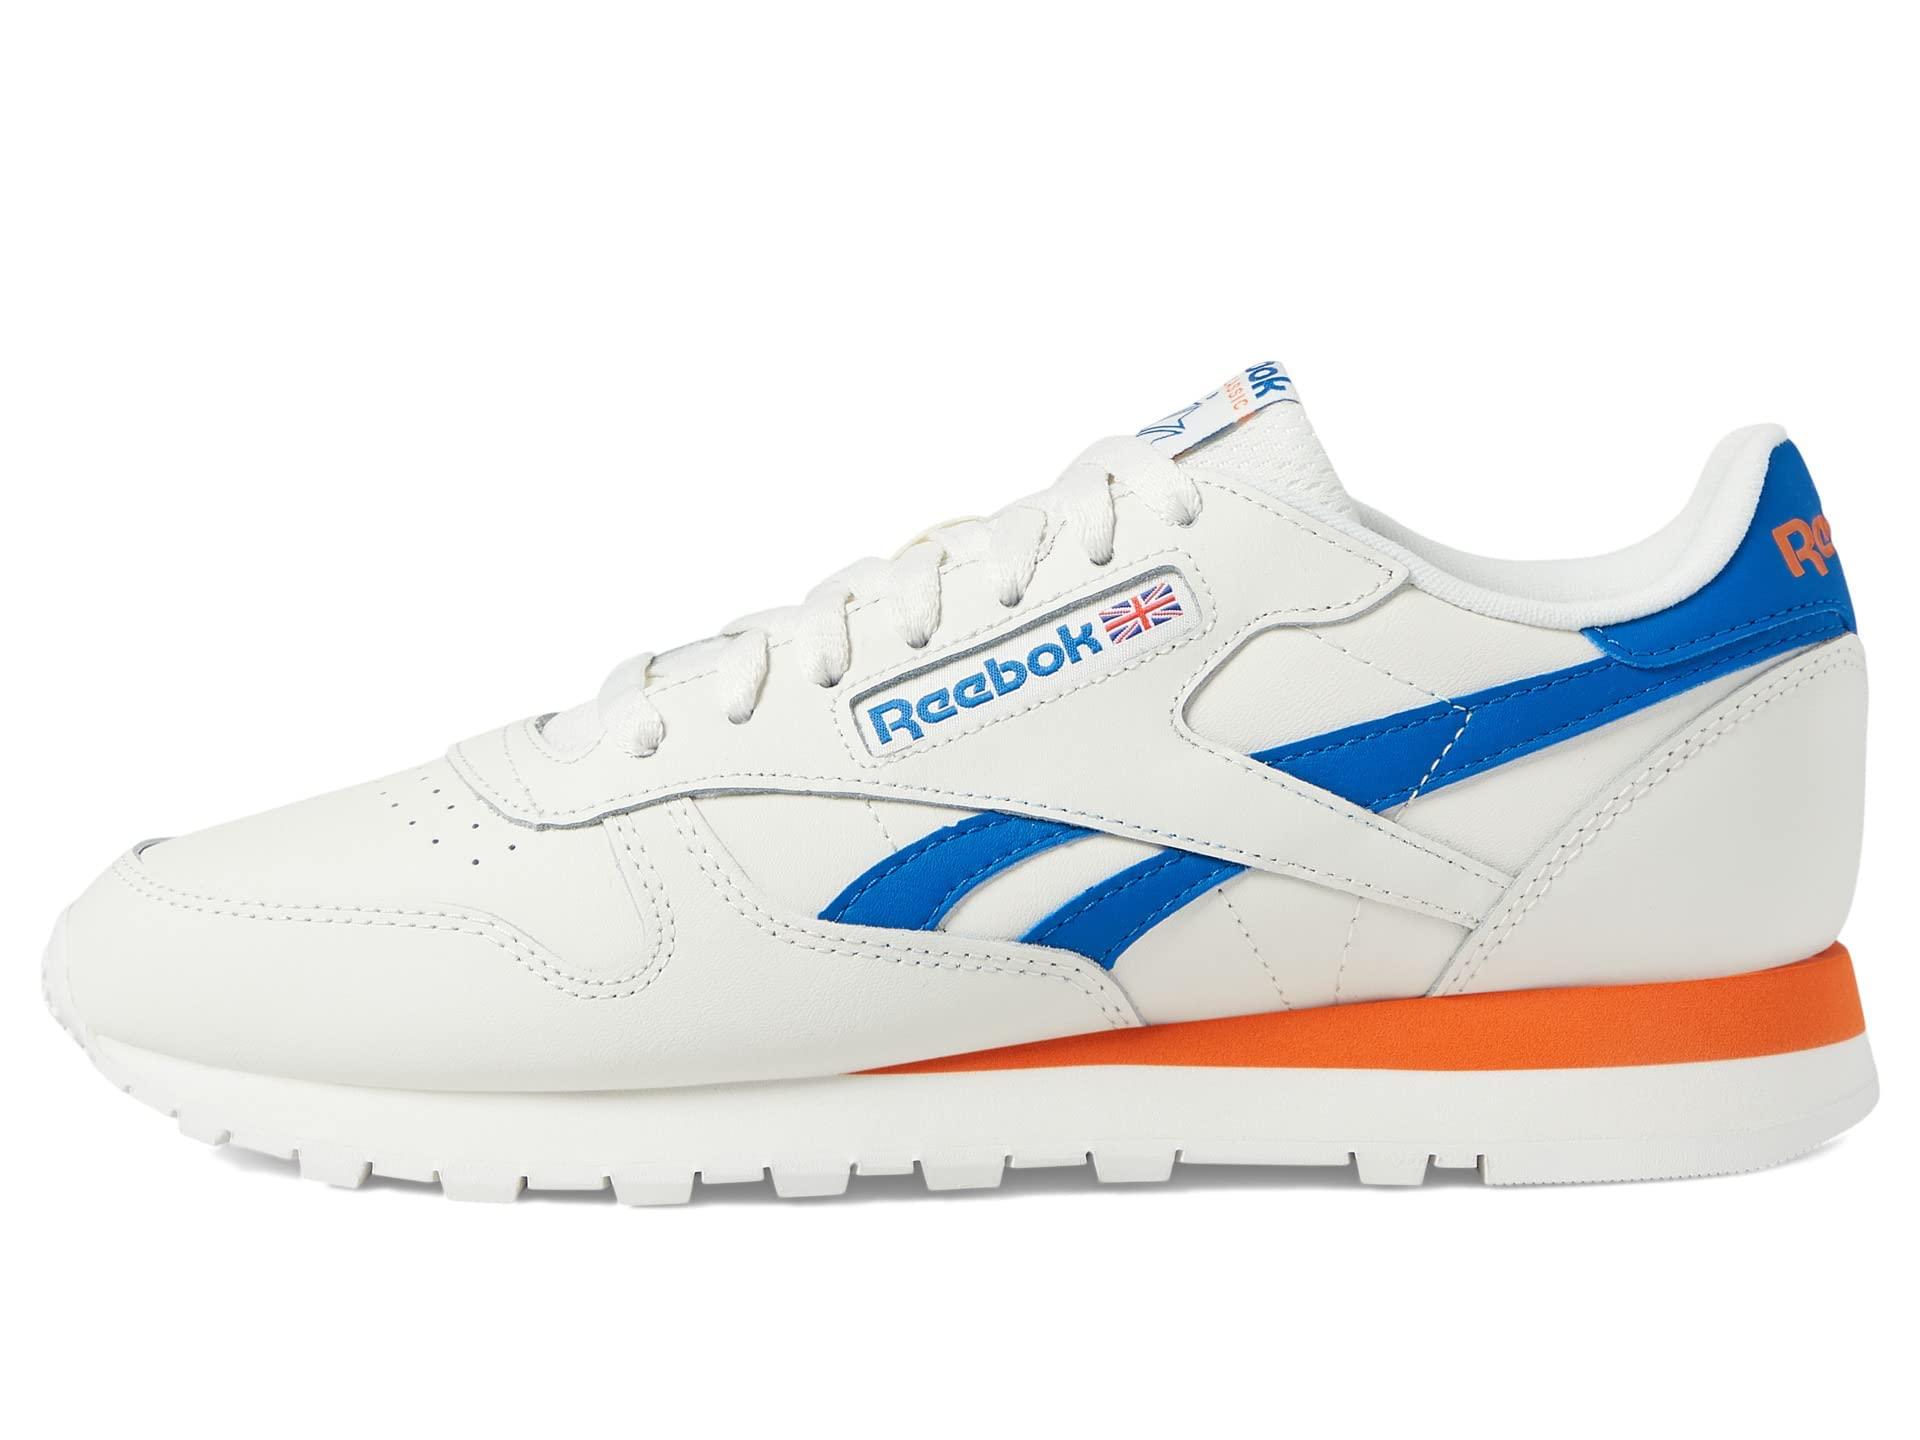 Classic Leather Sneakers in Cloud White / Hoops Blue F23 / Reebok Rubber  Gum-07 | Reebok Official Slovakia